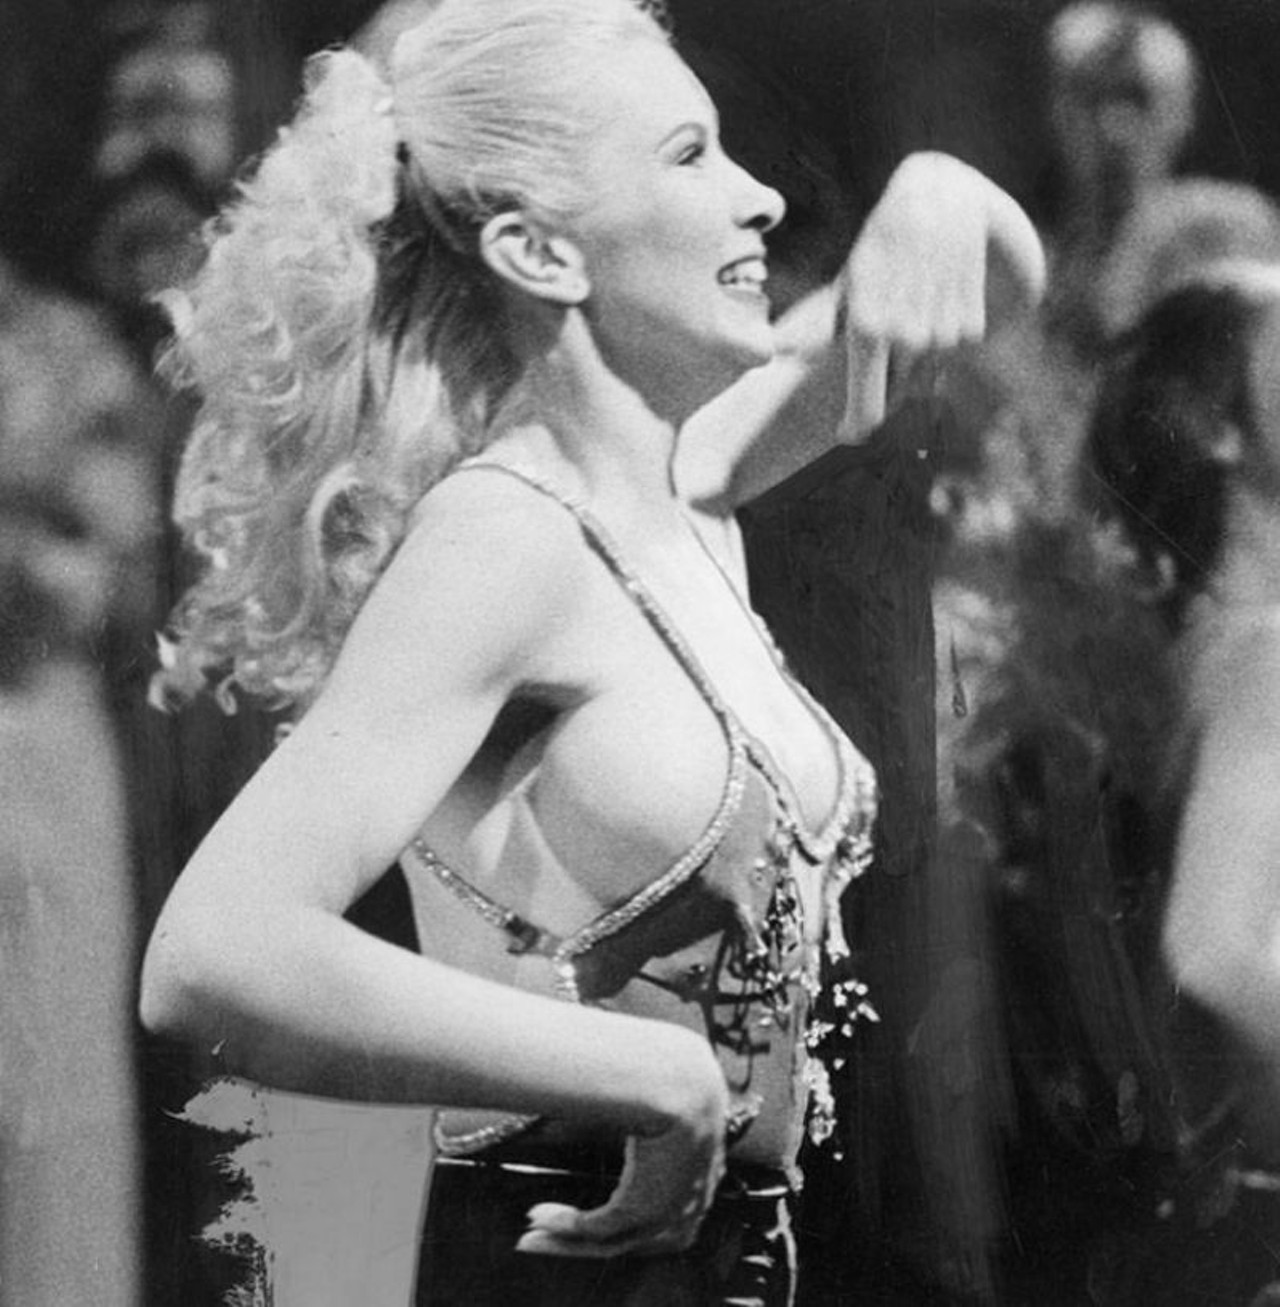 "A member of the professional dance group 'Dance Explosion' gives Weekday Fever viewers a glimpse of a sassy dance step during a guest appearance on the show."  --photo verso.  "Weekday Fever" was an hour-long program which aired Mondays through Fridays on WKYC during the height of the disco phenomenon. 1979